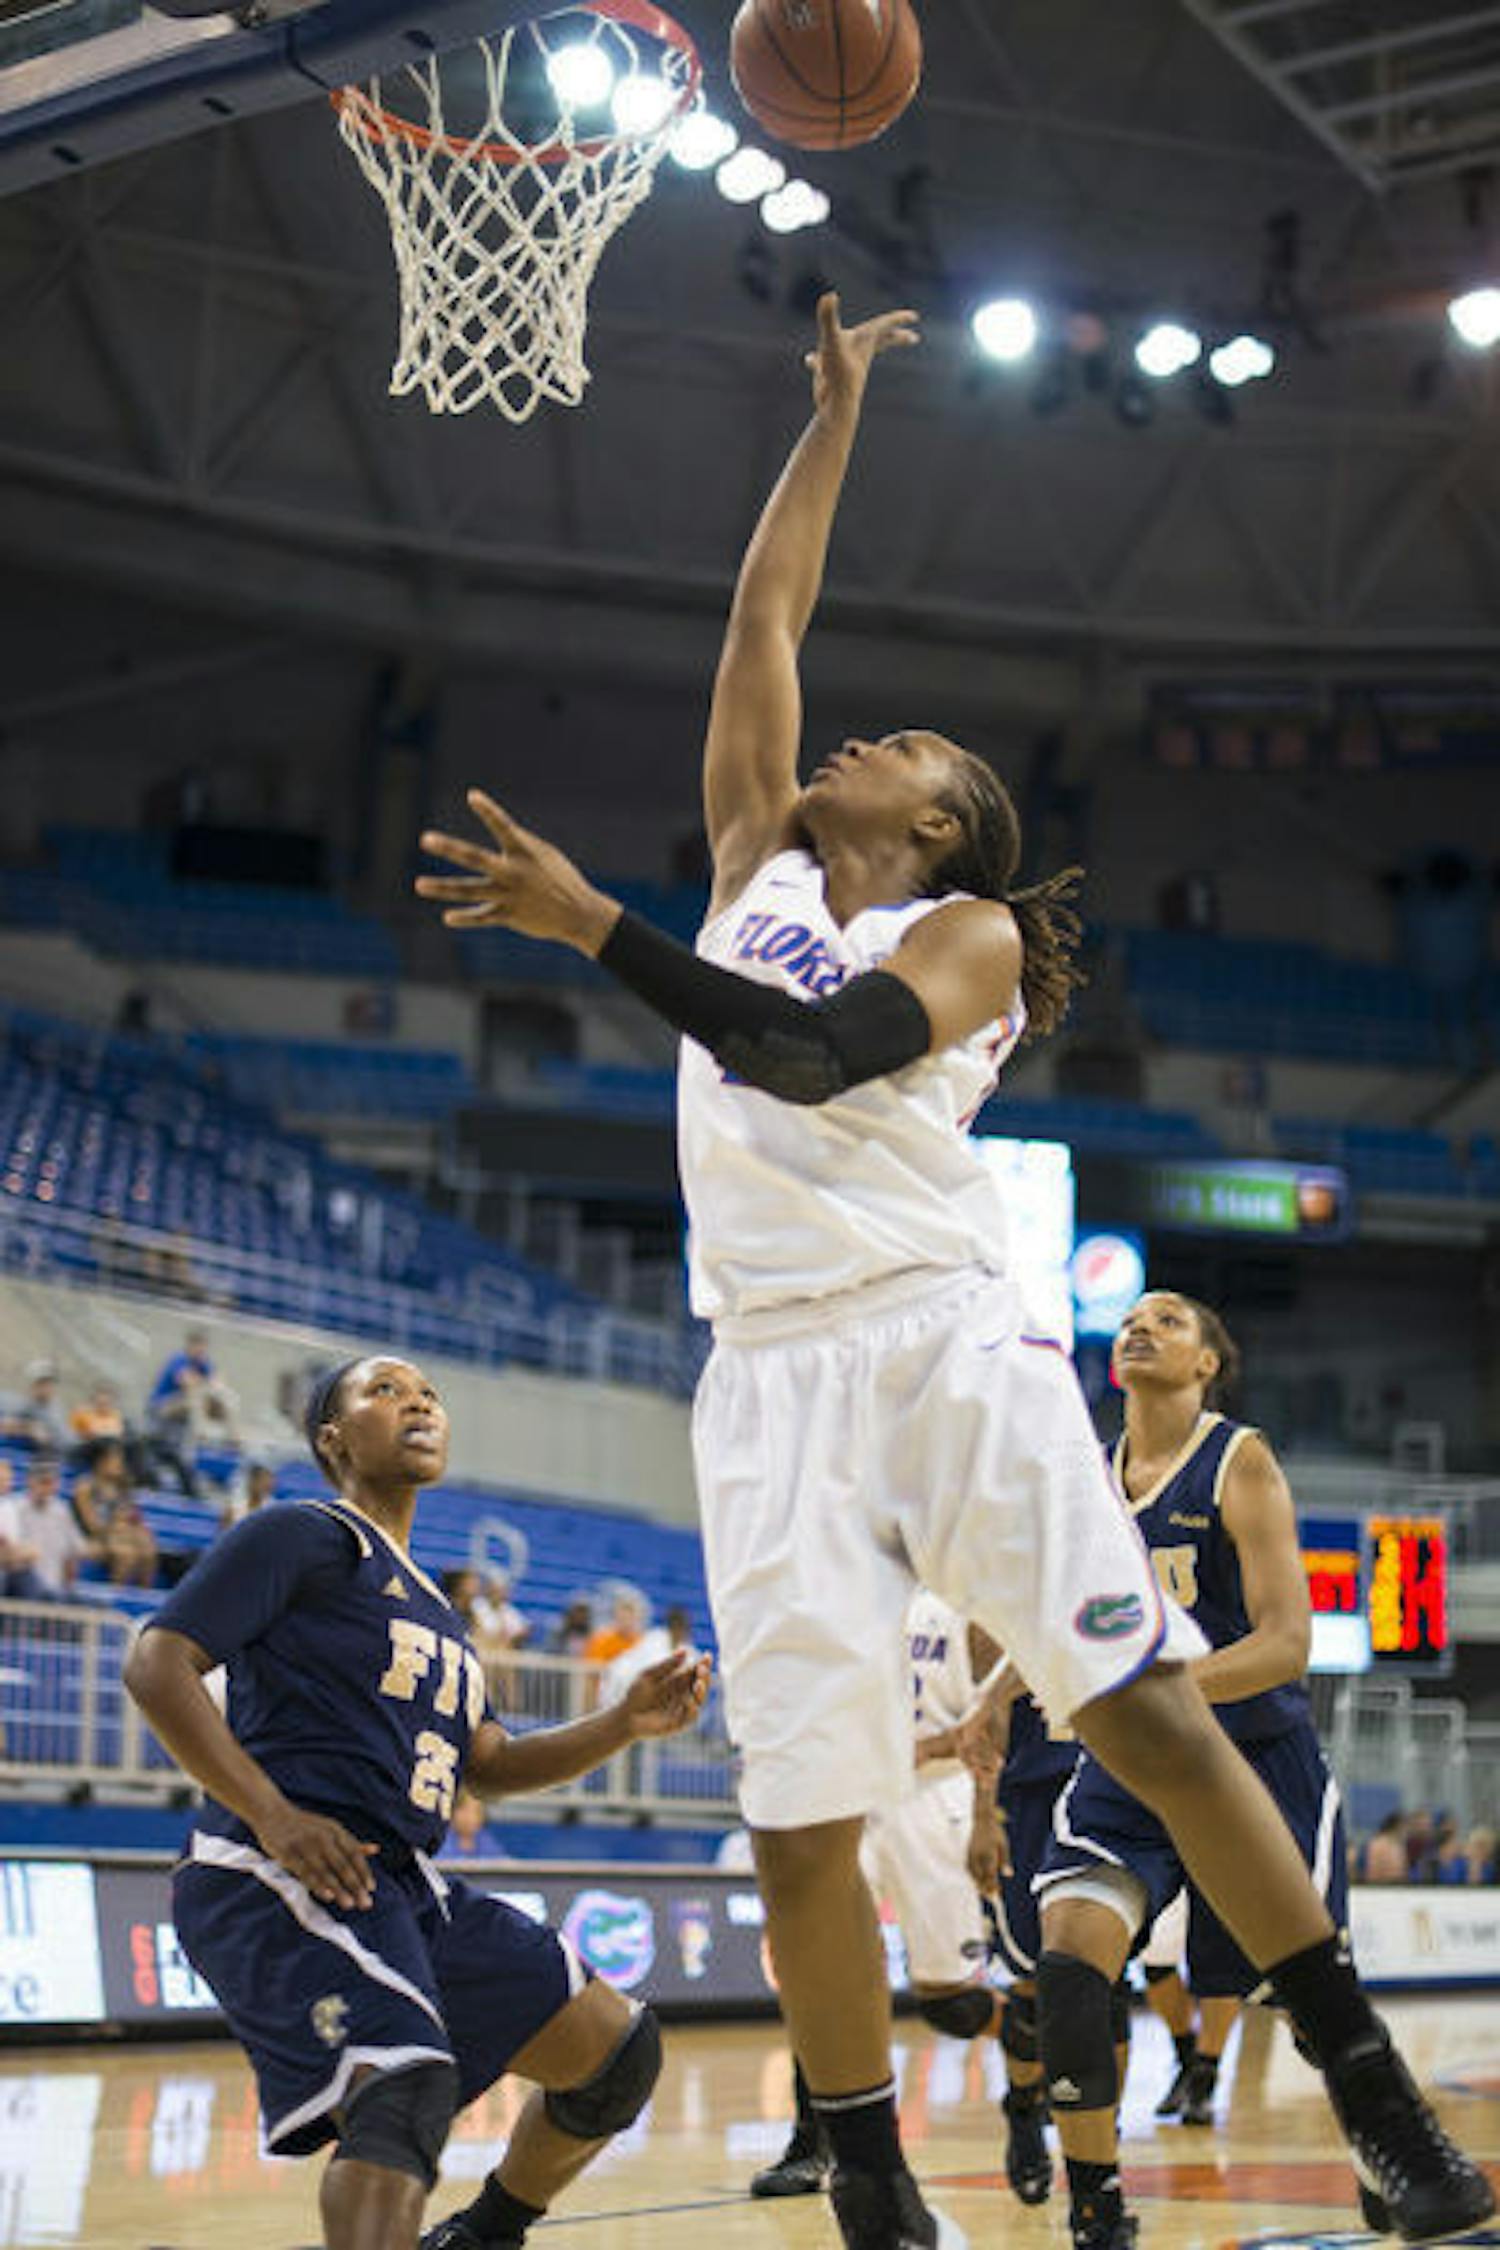 Sophomore Christin Mercer scores two of her career-high 31 points on a layup during Florida's 90-74 win over FIU on Dec. 21 at the O’Connell Center. The Gators claimed their fourth straight Gator Holiday Classic championship.